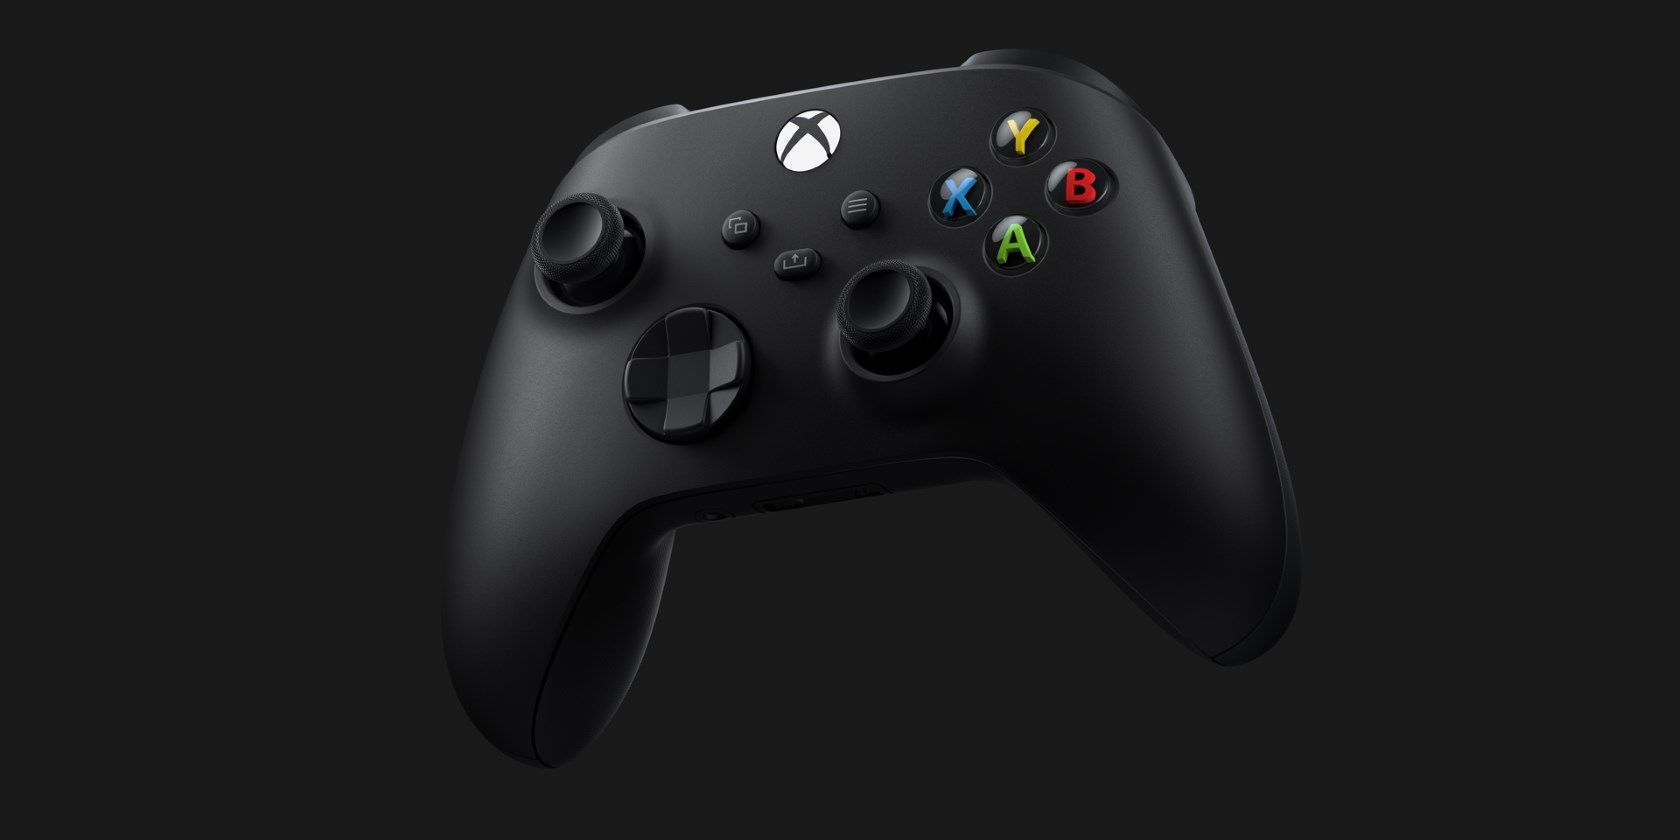 The official Xbox Series X controller